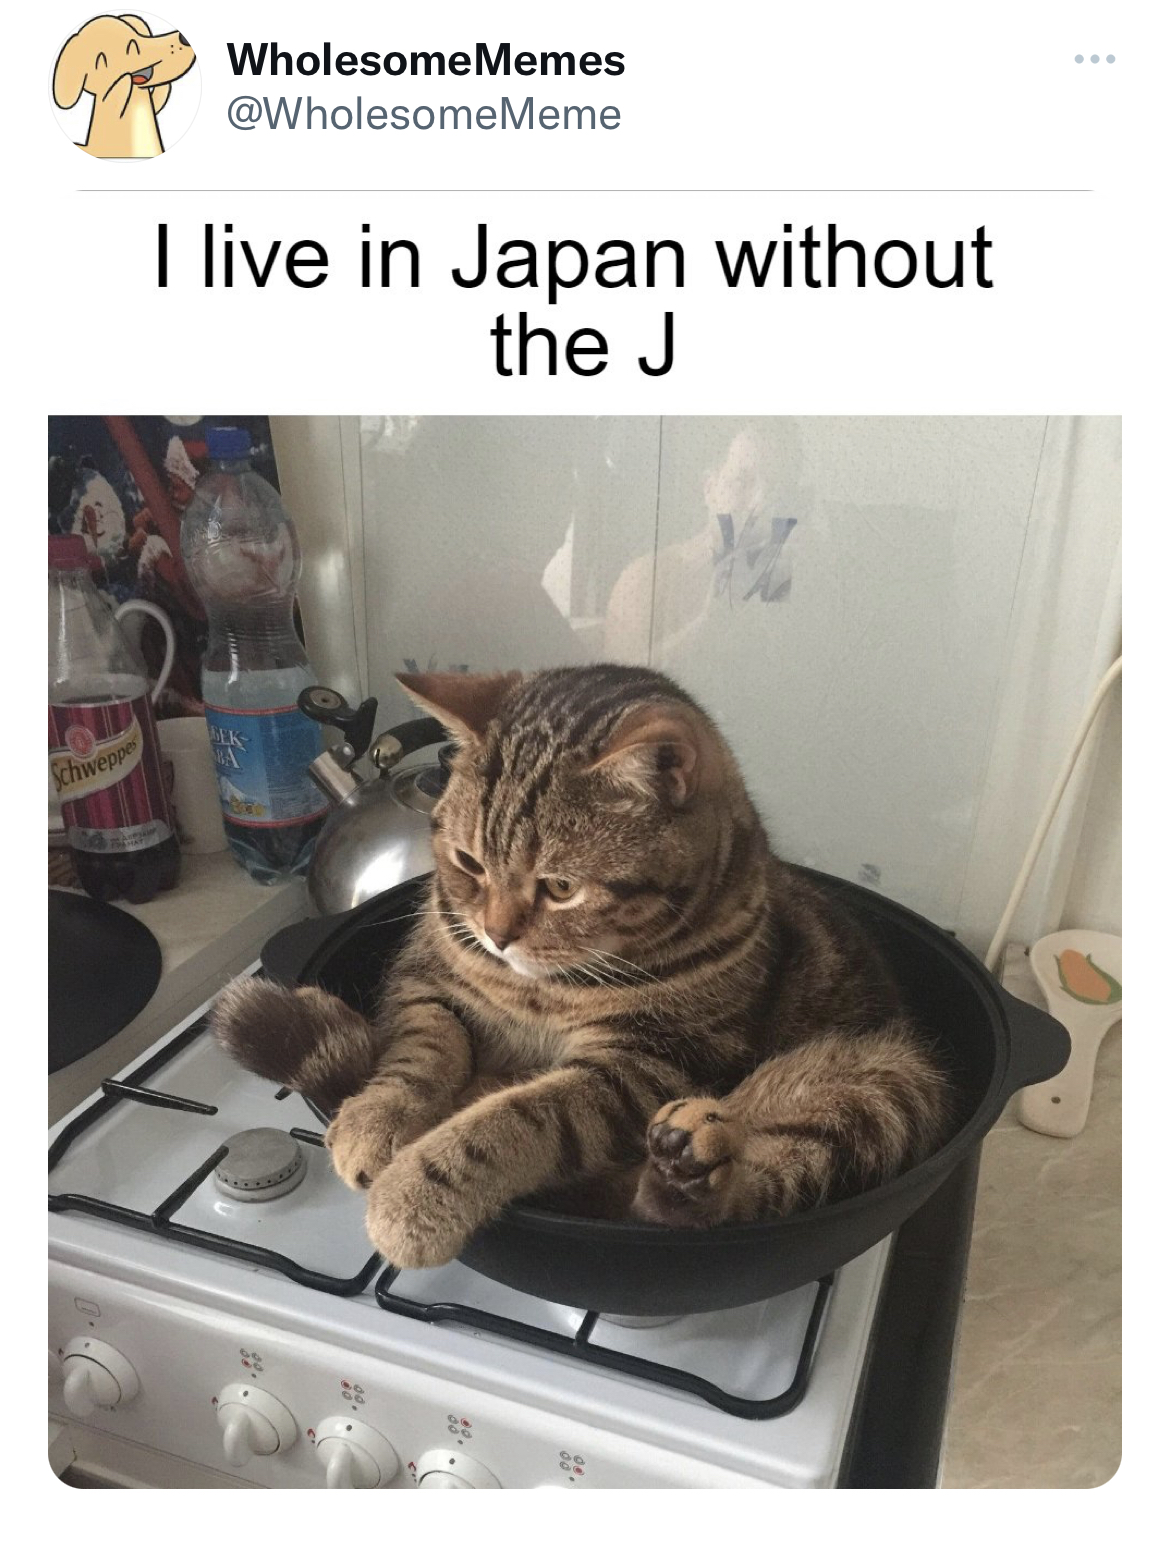 Fresh Daily Tweets - save japan dolphins - Schwen WholesomeMemes I live in Japan without the J www